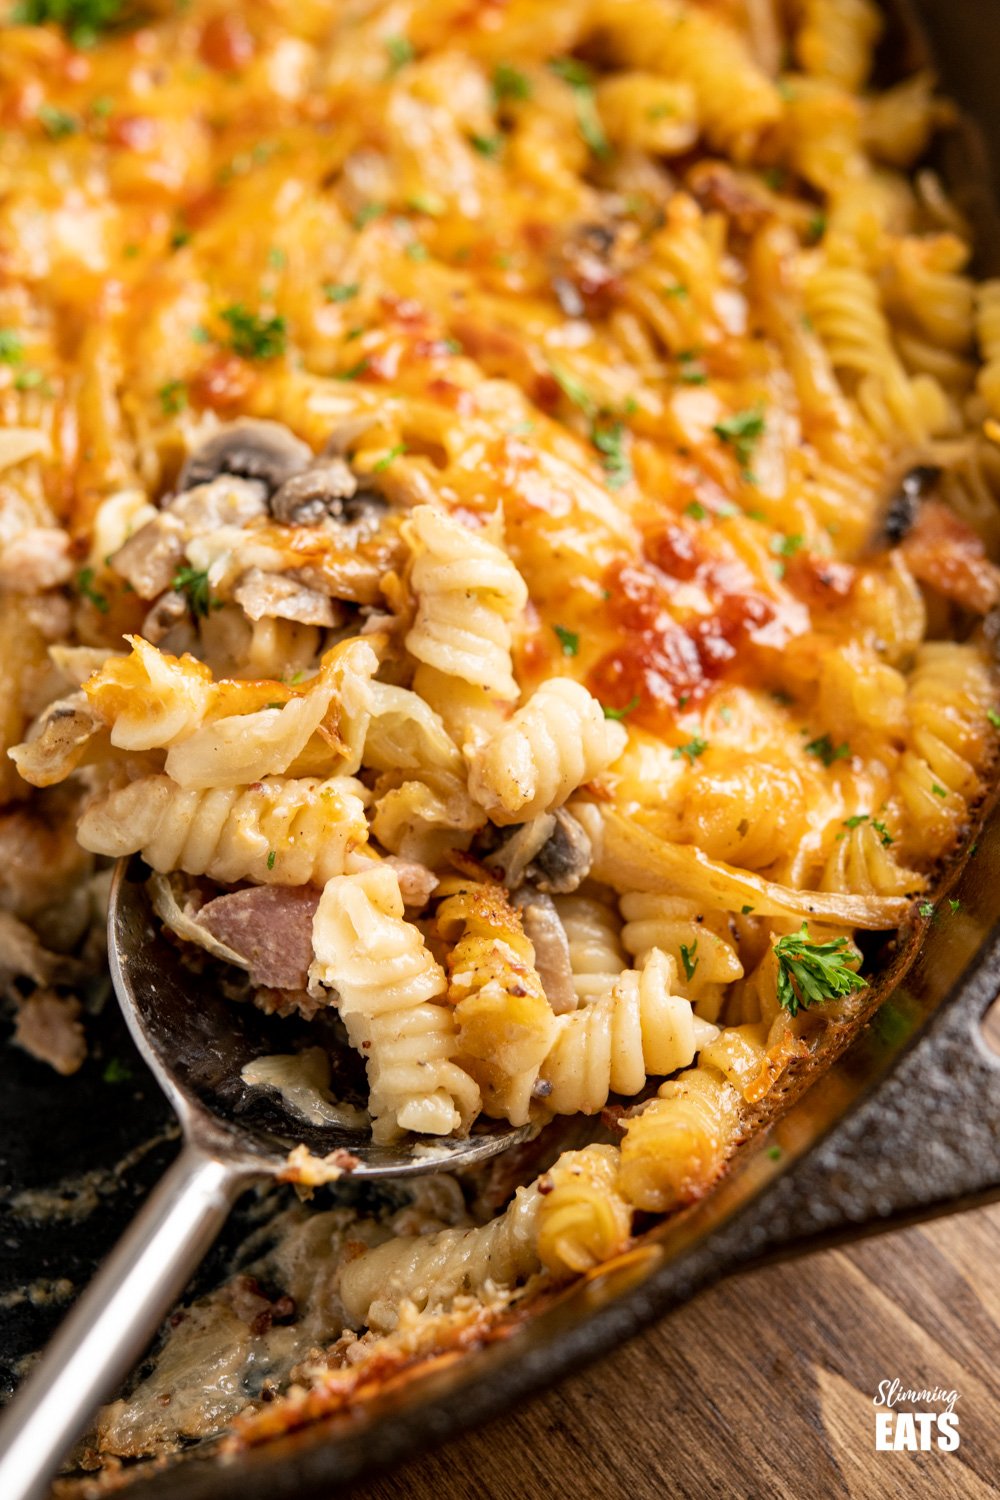 metal spoon scooping Bacon, Fennel and Mushroom Pasta Bake from cast iron skillet